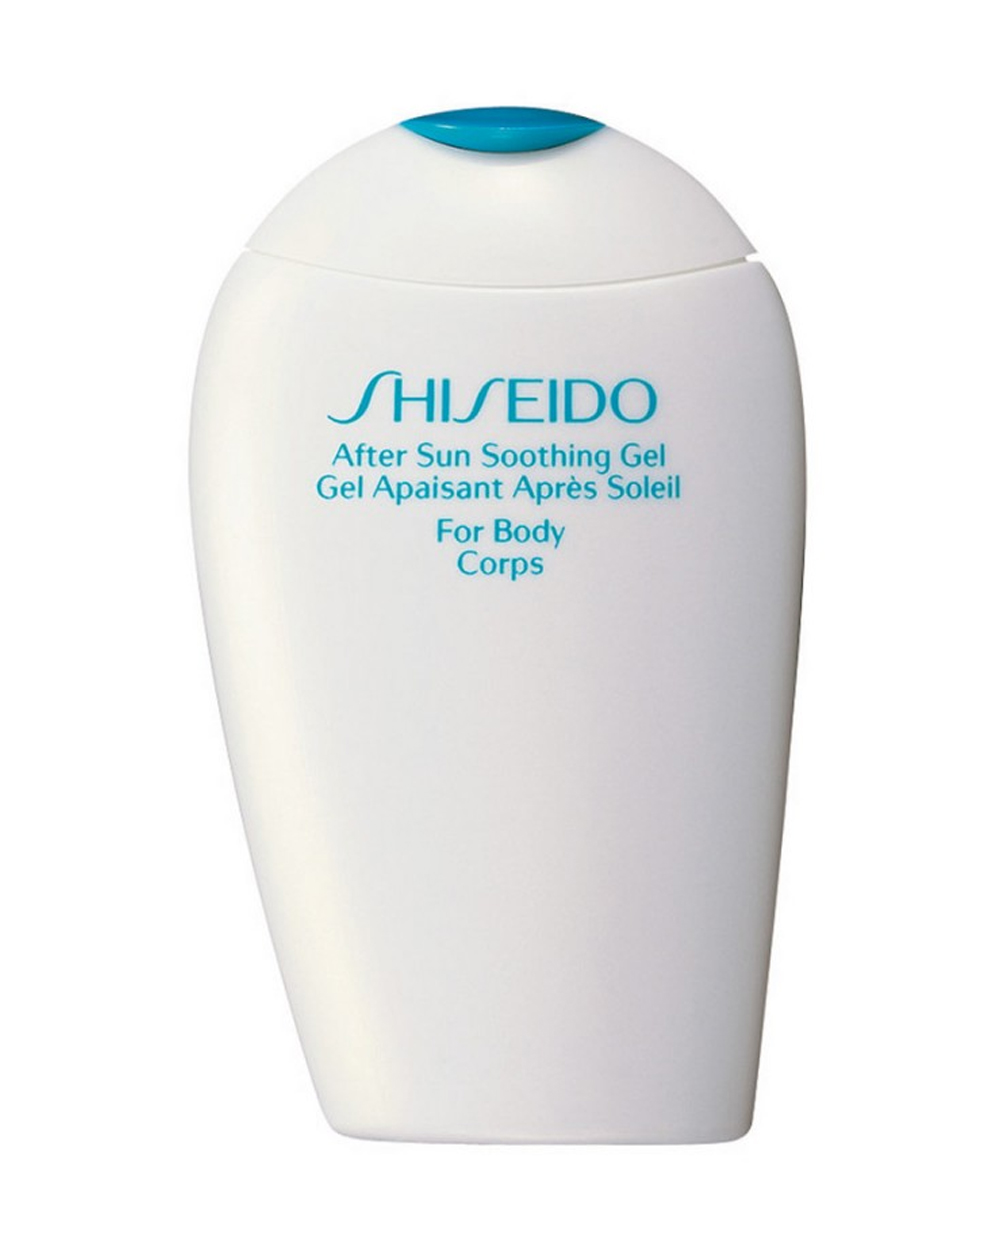 Shiseido After Sun Soothing Gel, $44 from Farmers